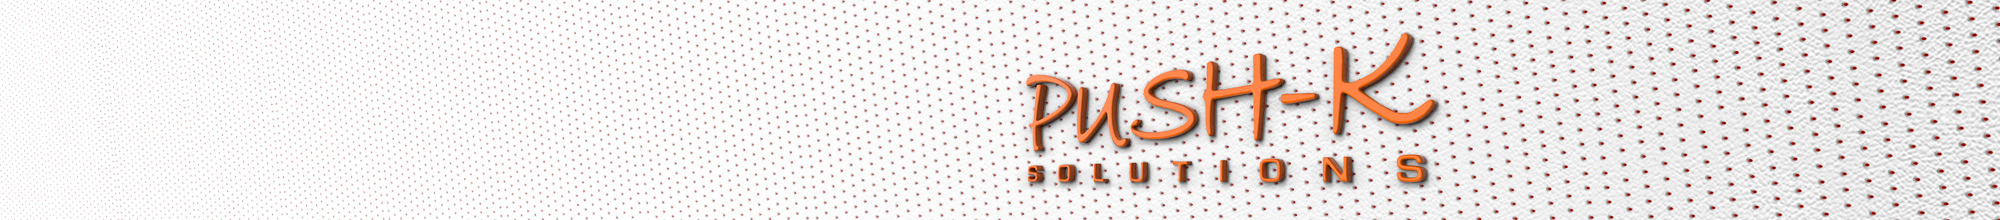 PUSH-K Solutions's profile banner